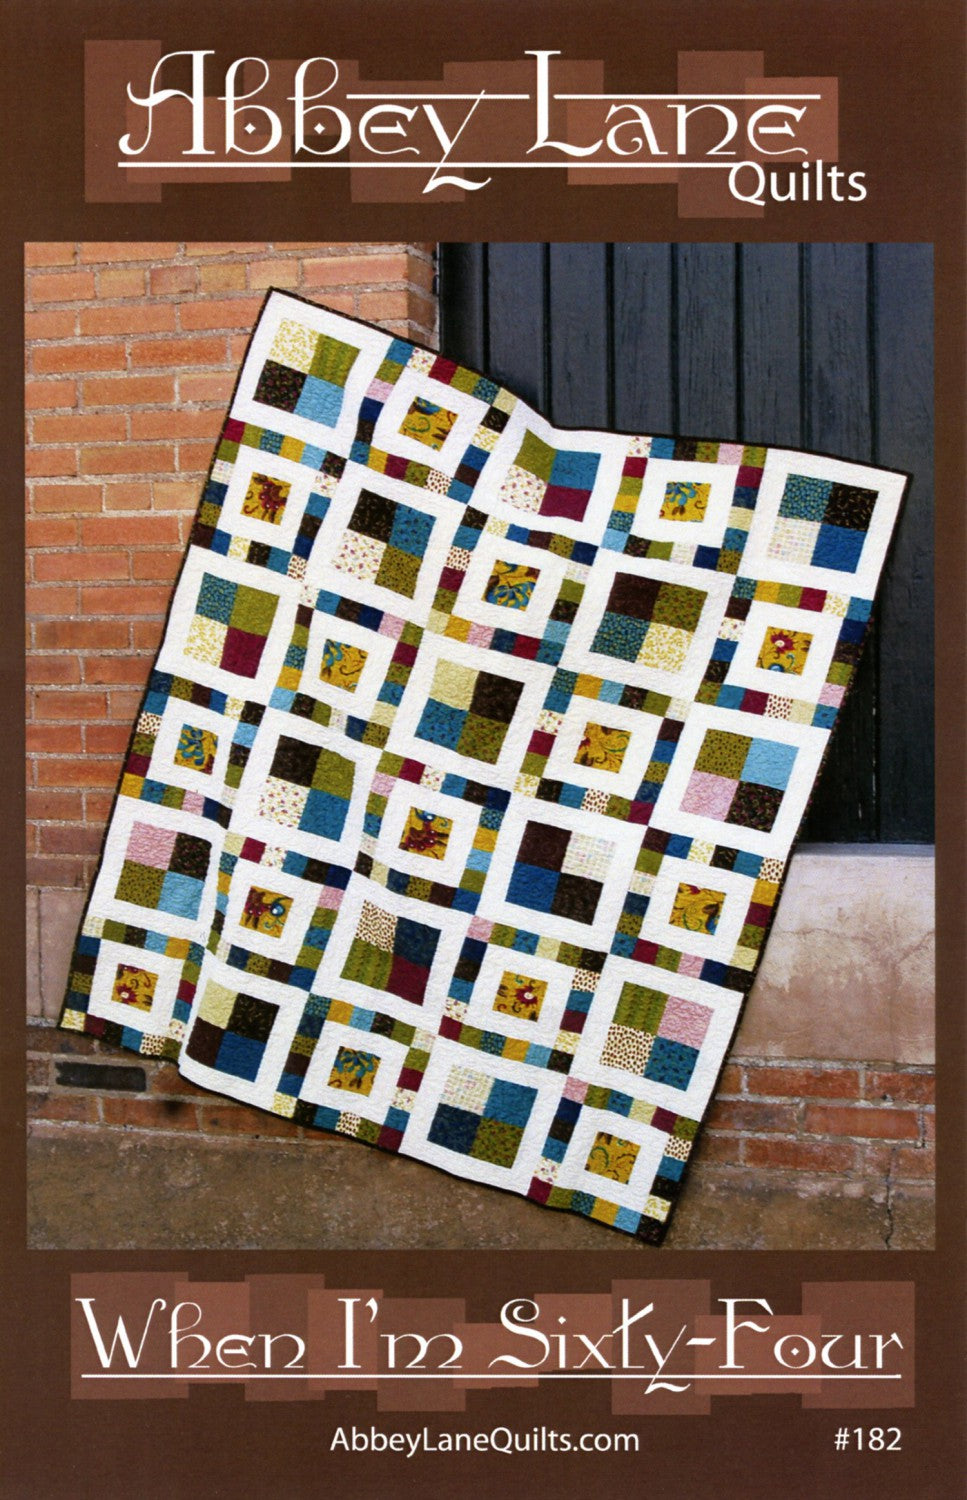 Abbey Lane Quilts - When I'm Sixty Four - quilt pattern